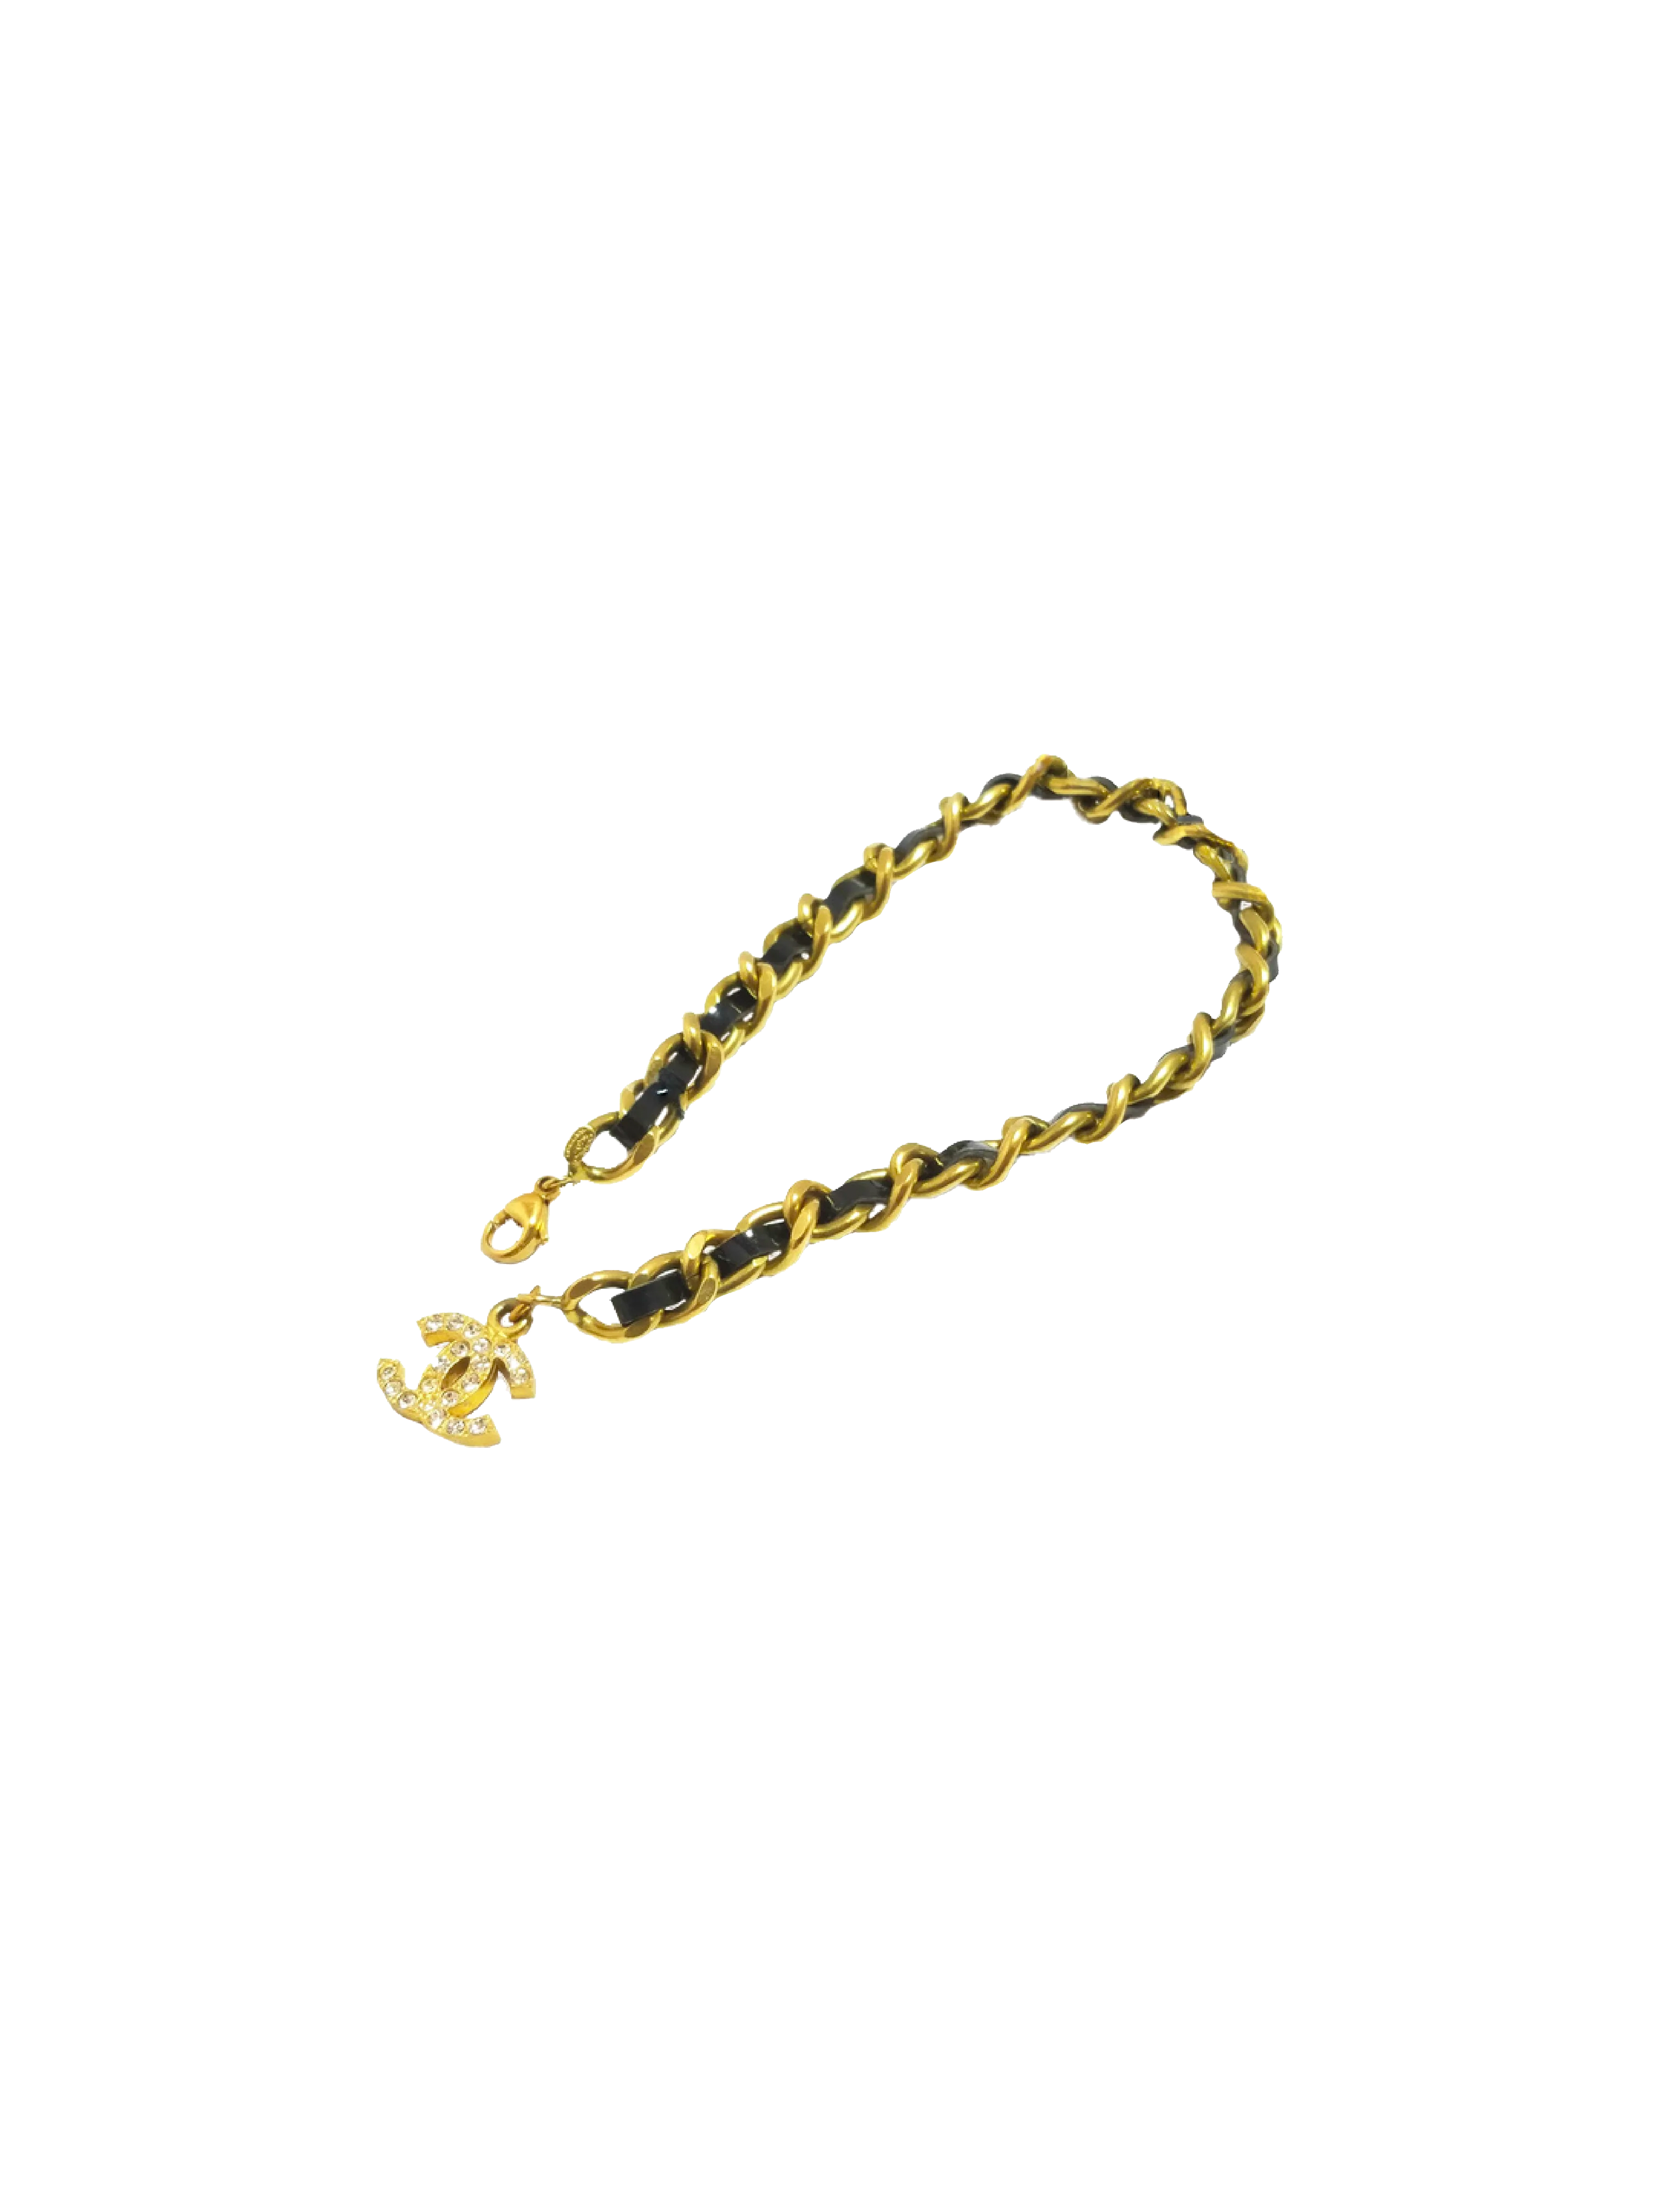 Chanel 2000s Gold Chain Leather Bracelet